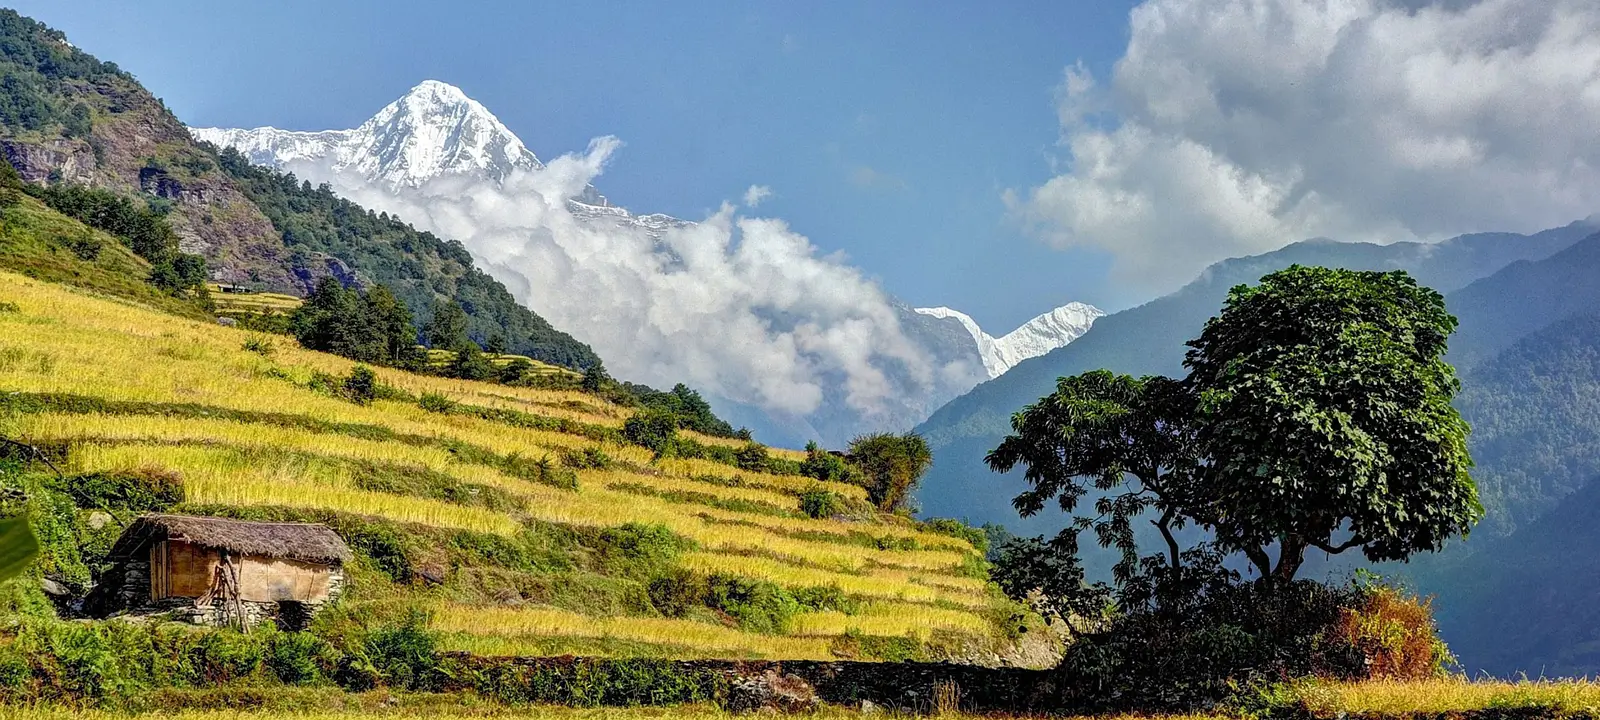 Eco Tourism in Nepal